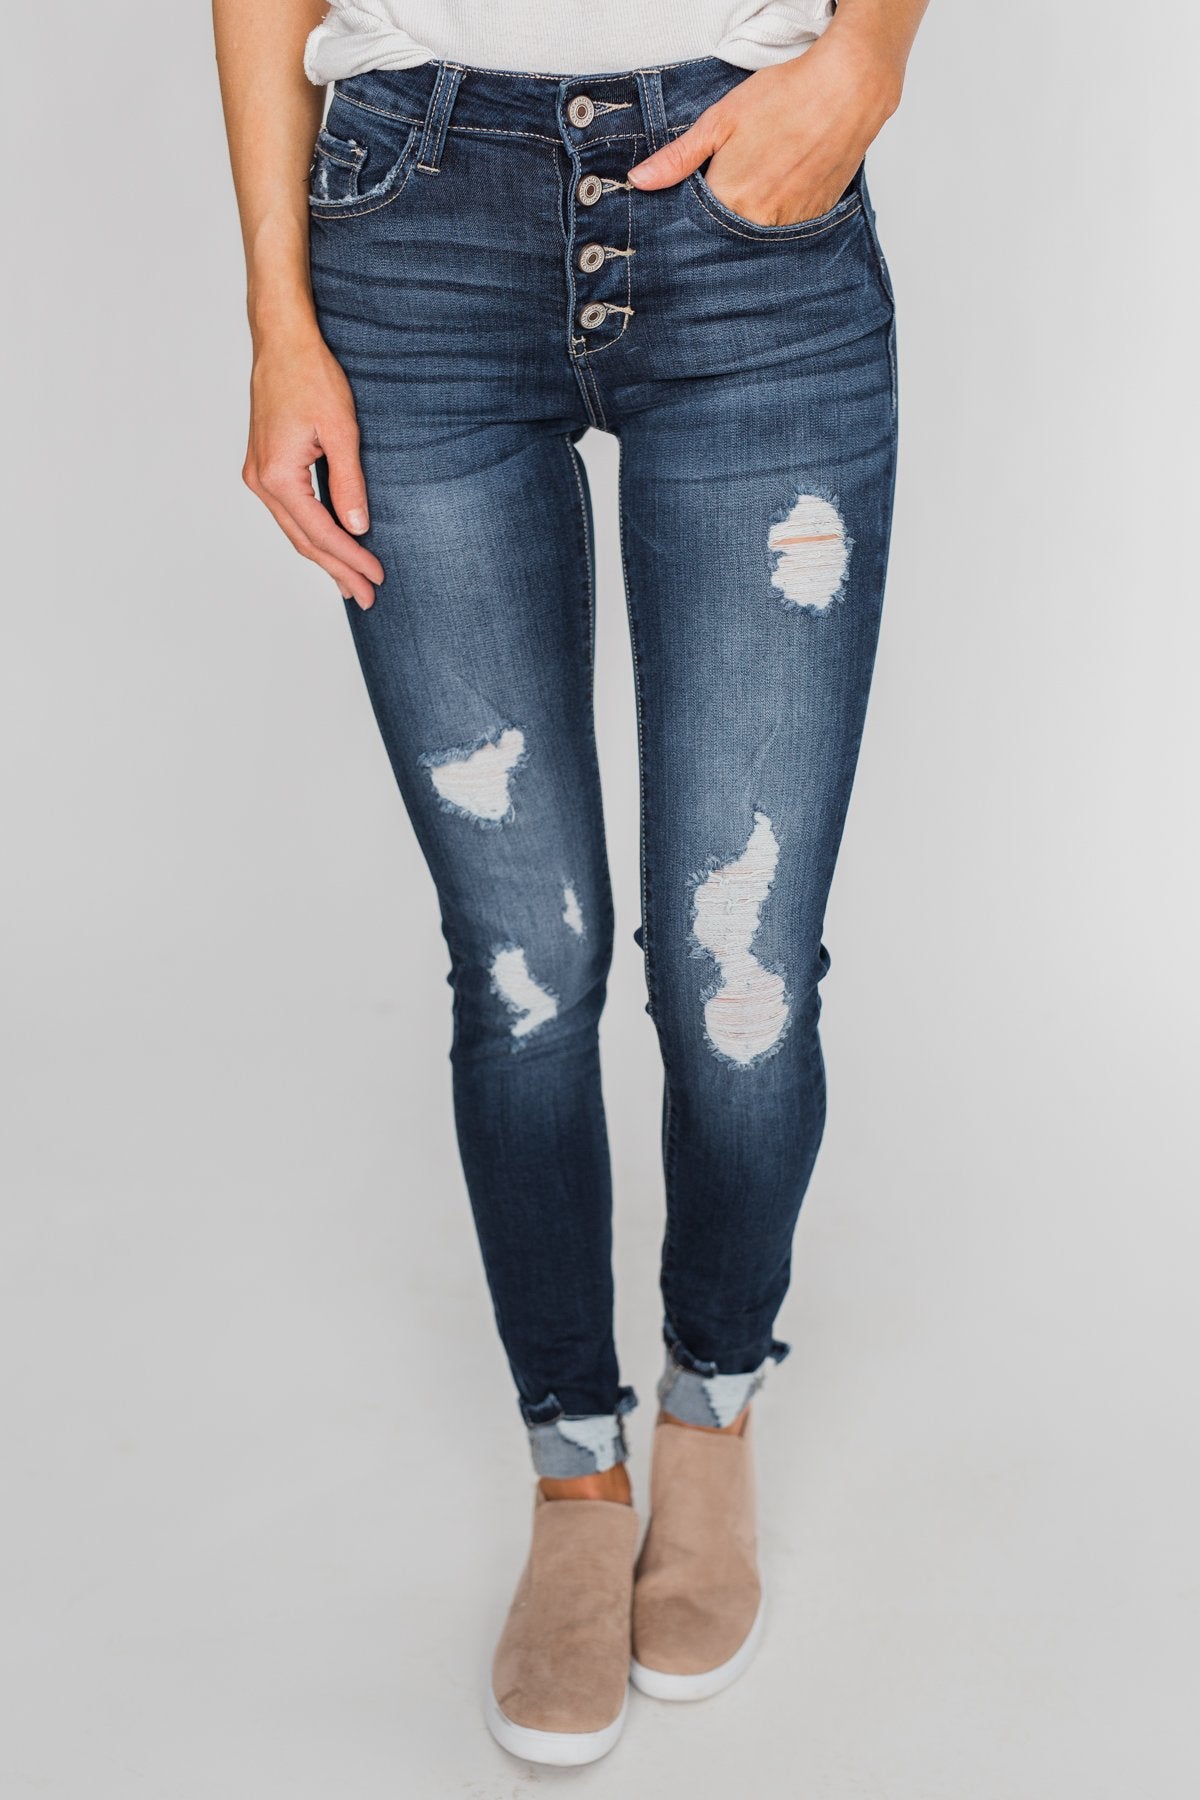 KanCan Jeans- Reese Wash – The Pulse Boutique